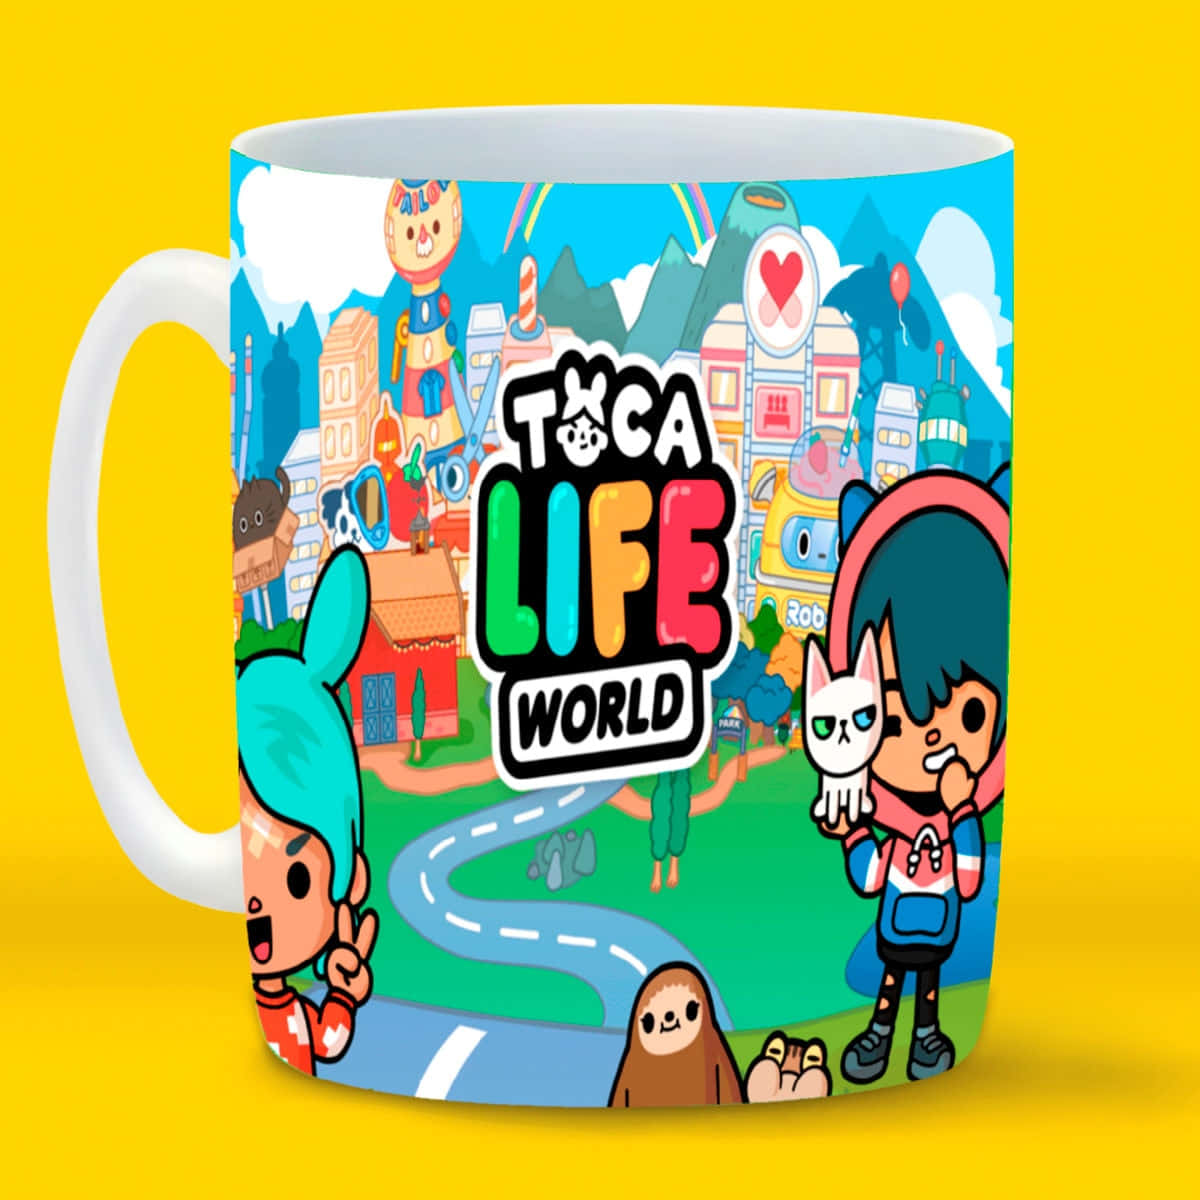 "Welcome to the fun world of Toca Boca!"